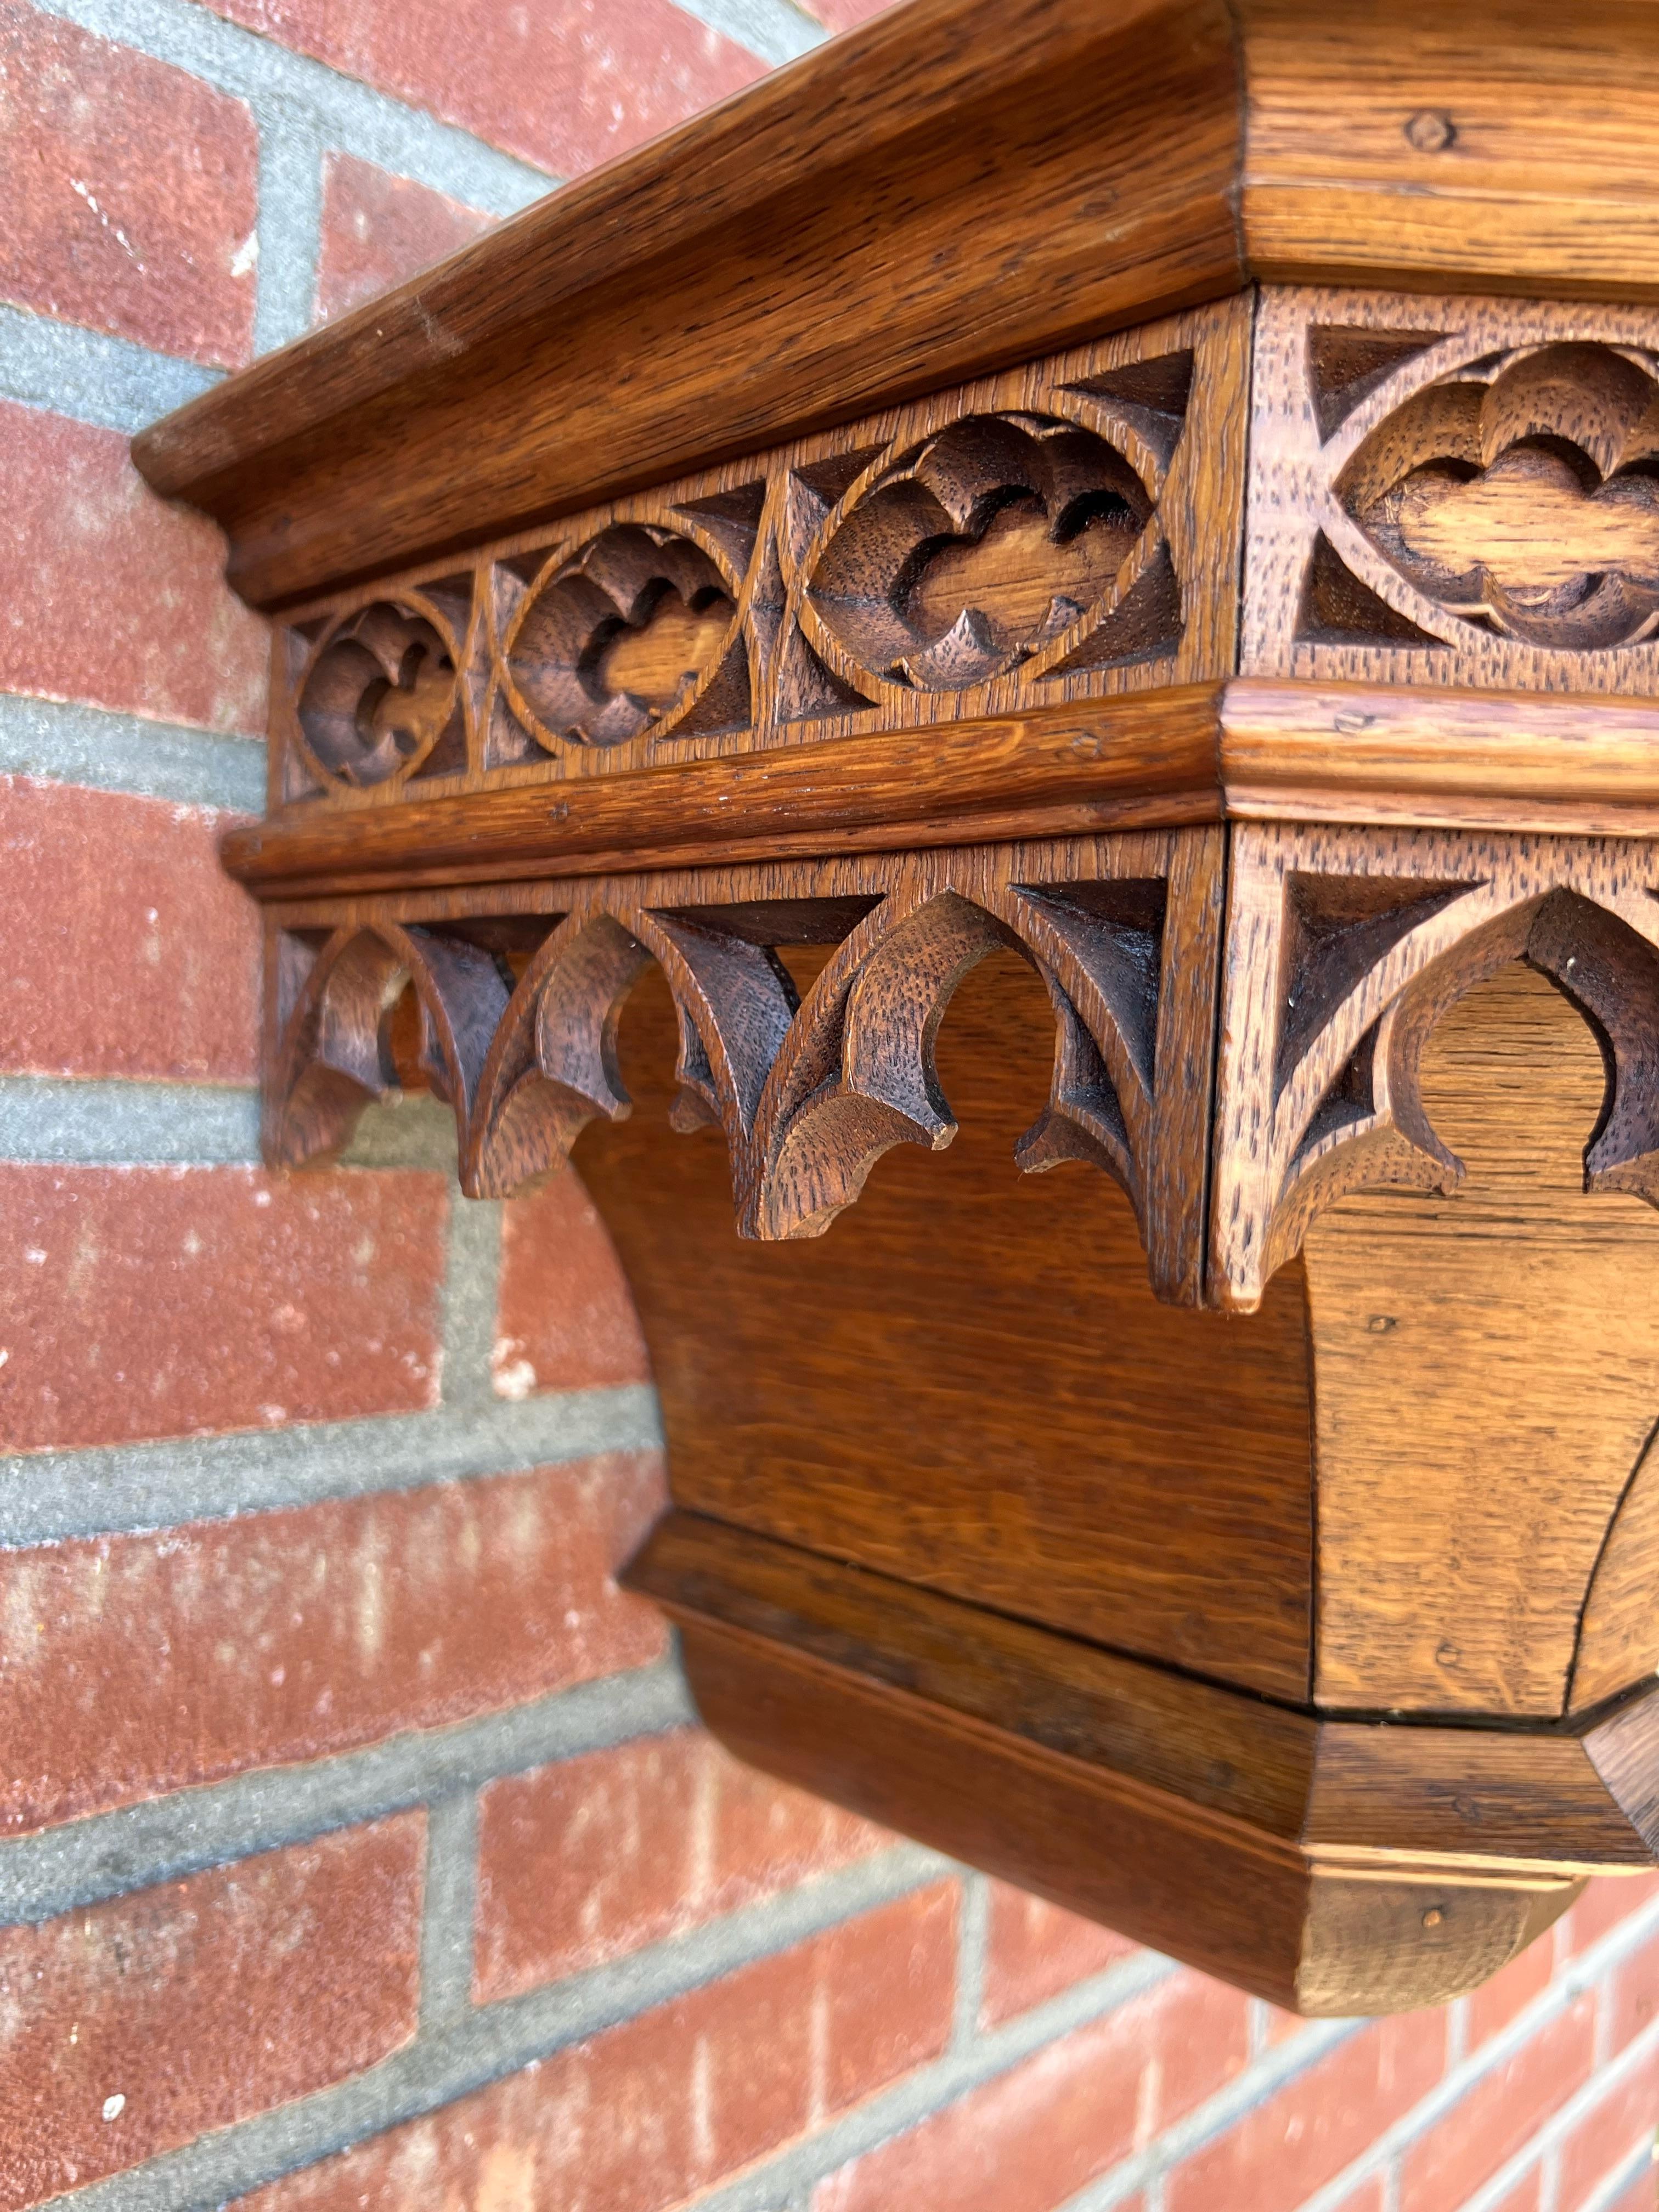 European Antique Hand Carved Gothic Revival Wall Bracket, Shelf w Museum Quality Carvings